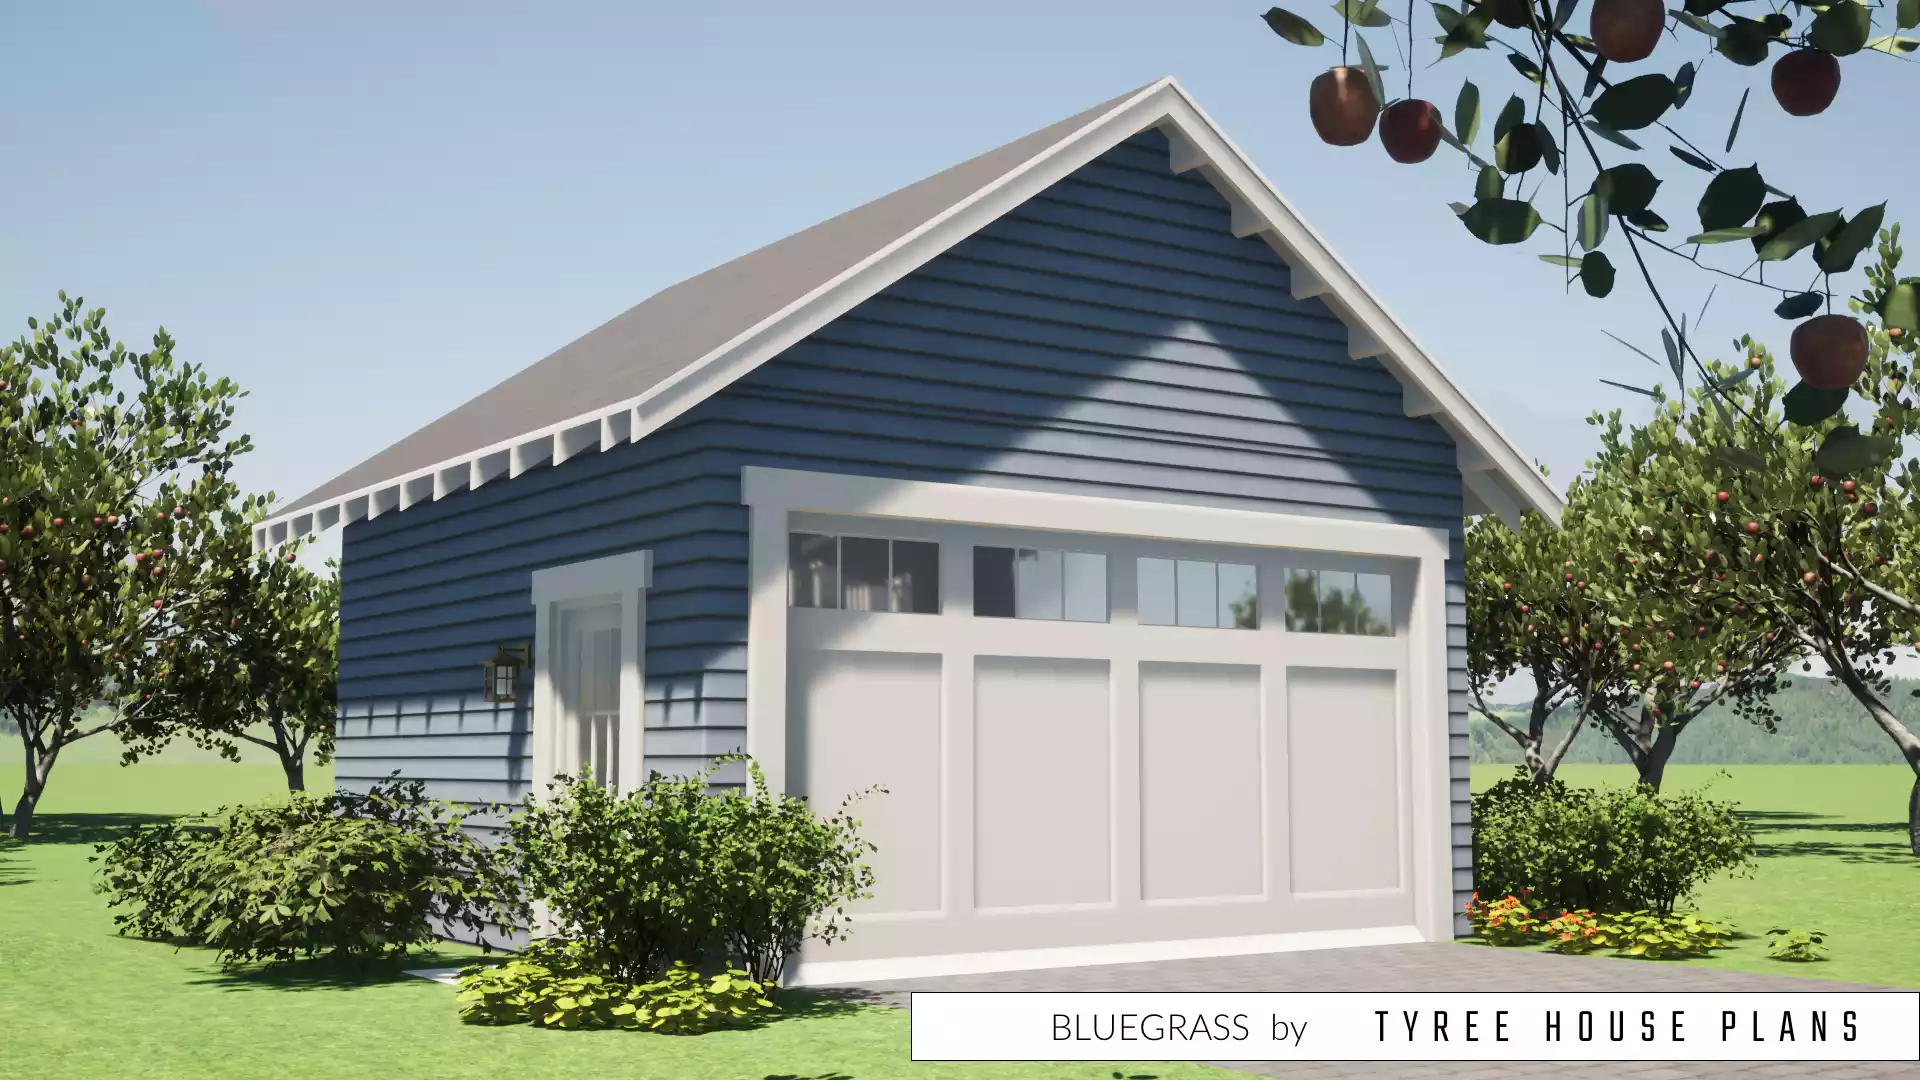 Detached garage. Bluegrass by Tyree House Plans.